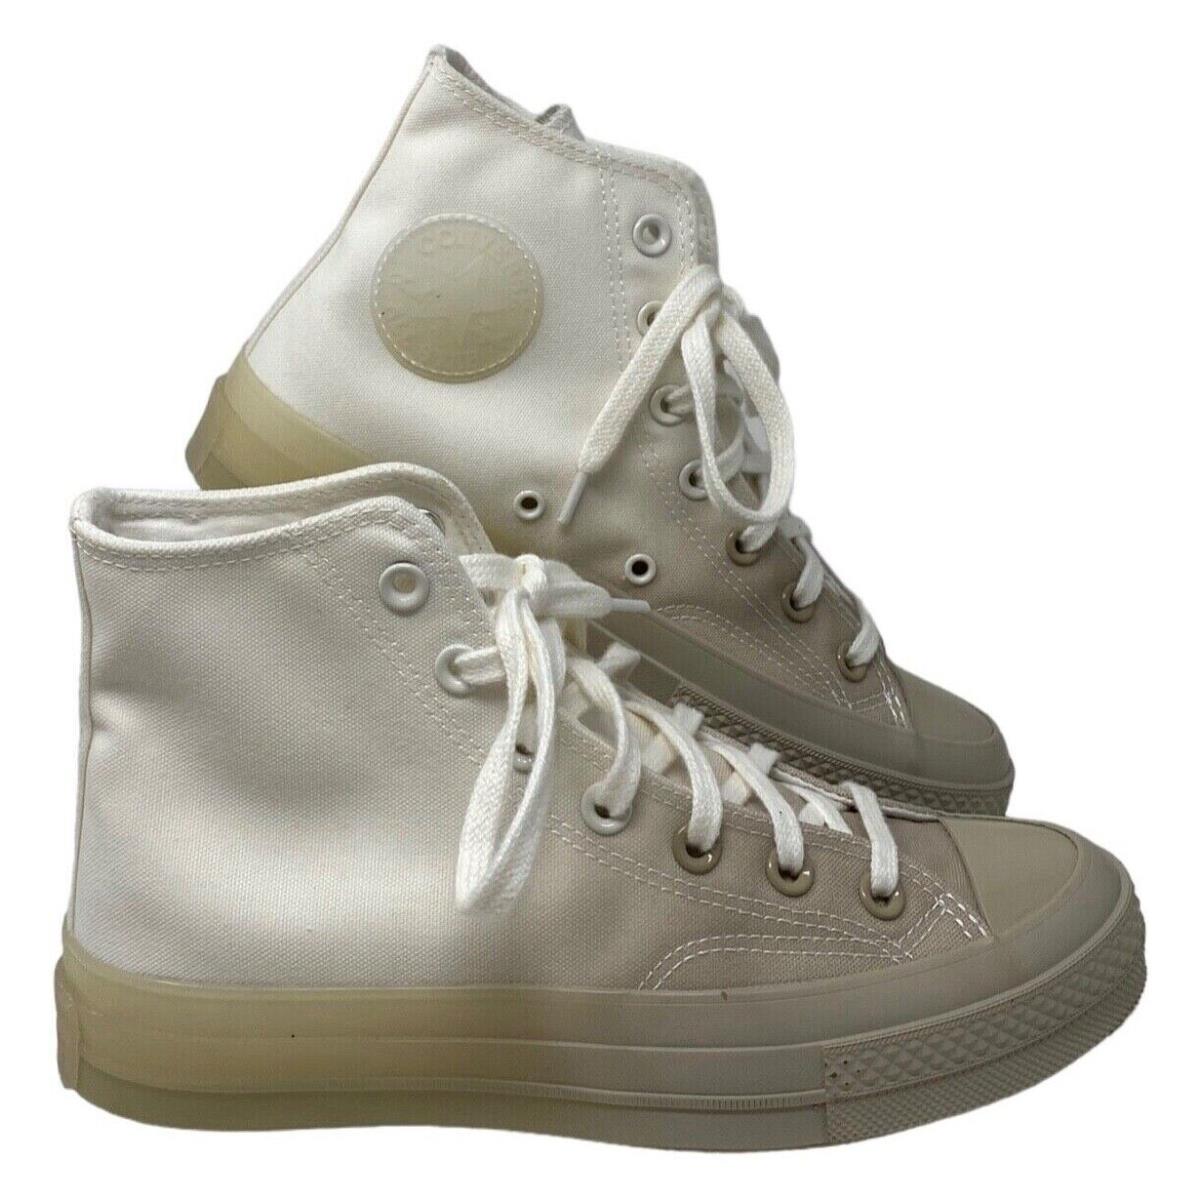 Converse Chuck Taylor 70 Shoes For Women High Canvas Beige Ombre Skate AO7086C